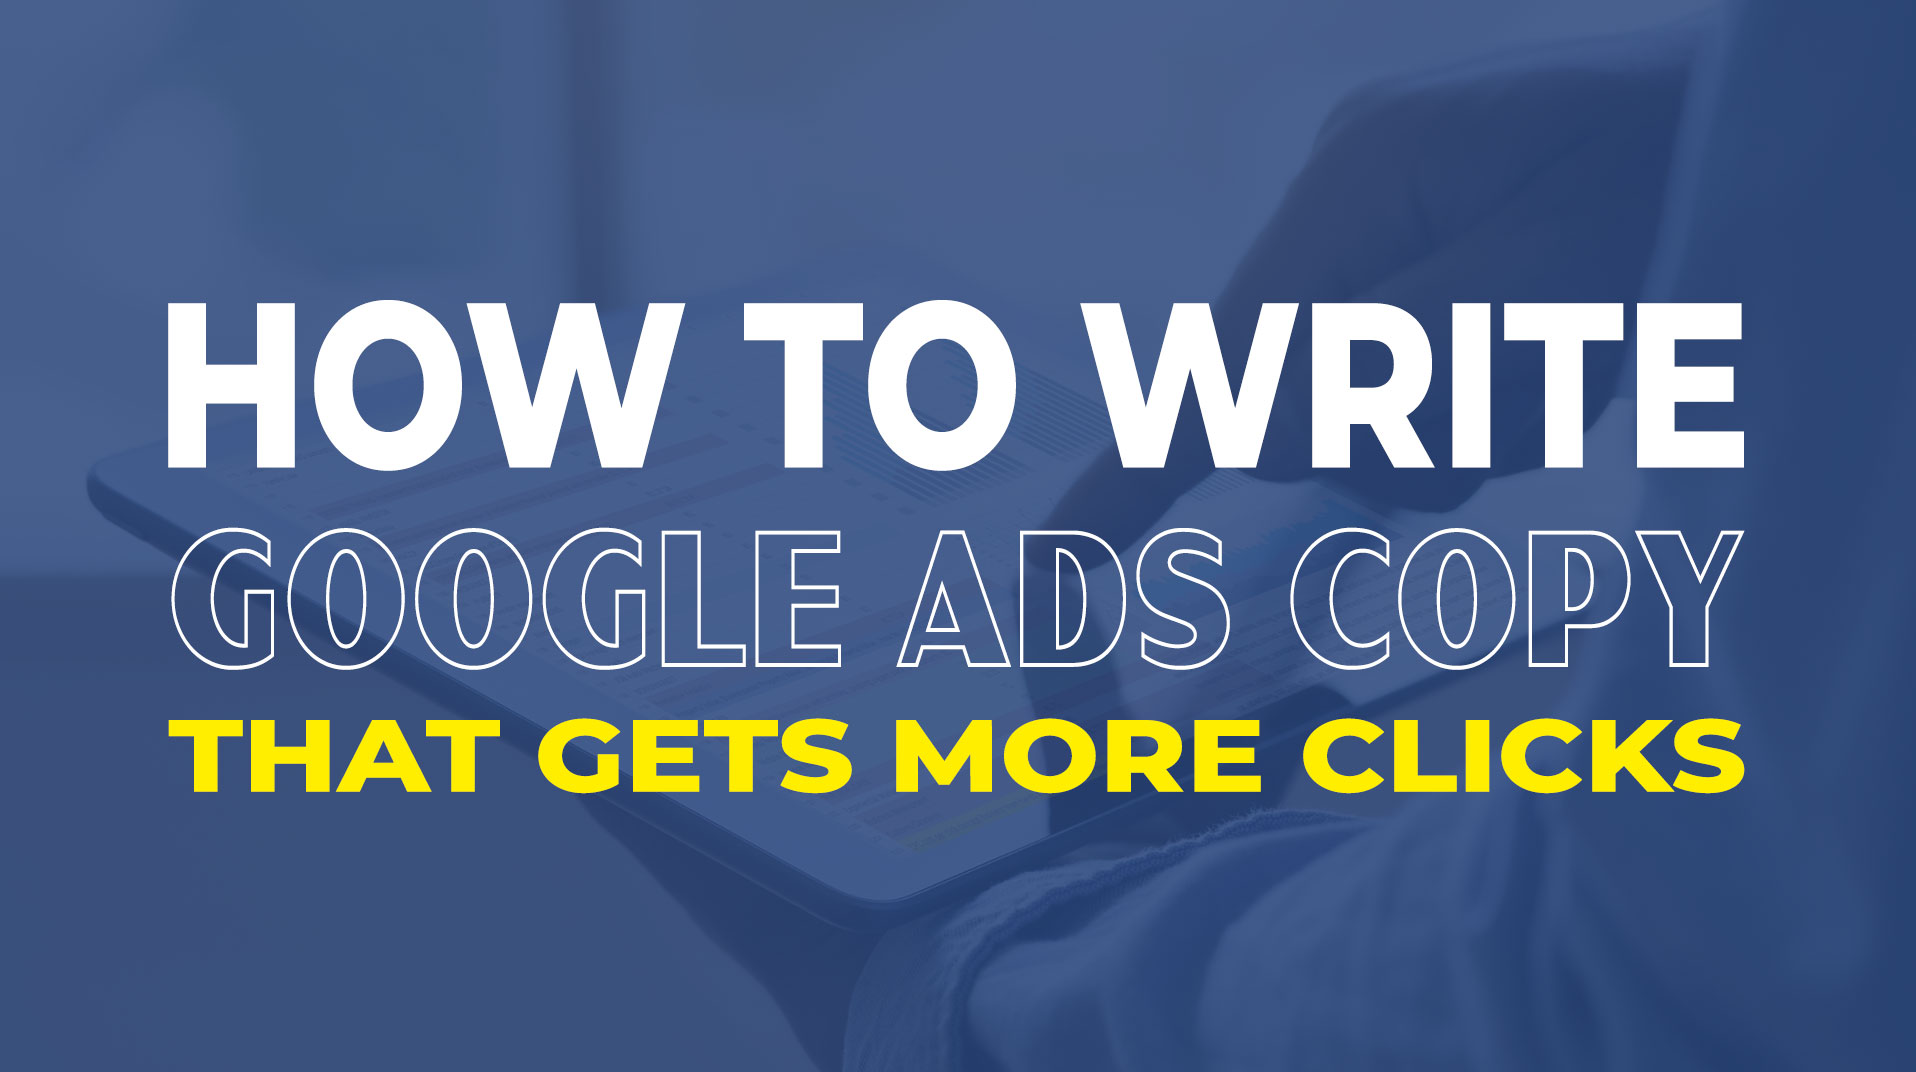 Crafting the Perfect Google Ad Copy for More Clicks and Leads